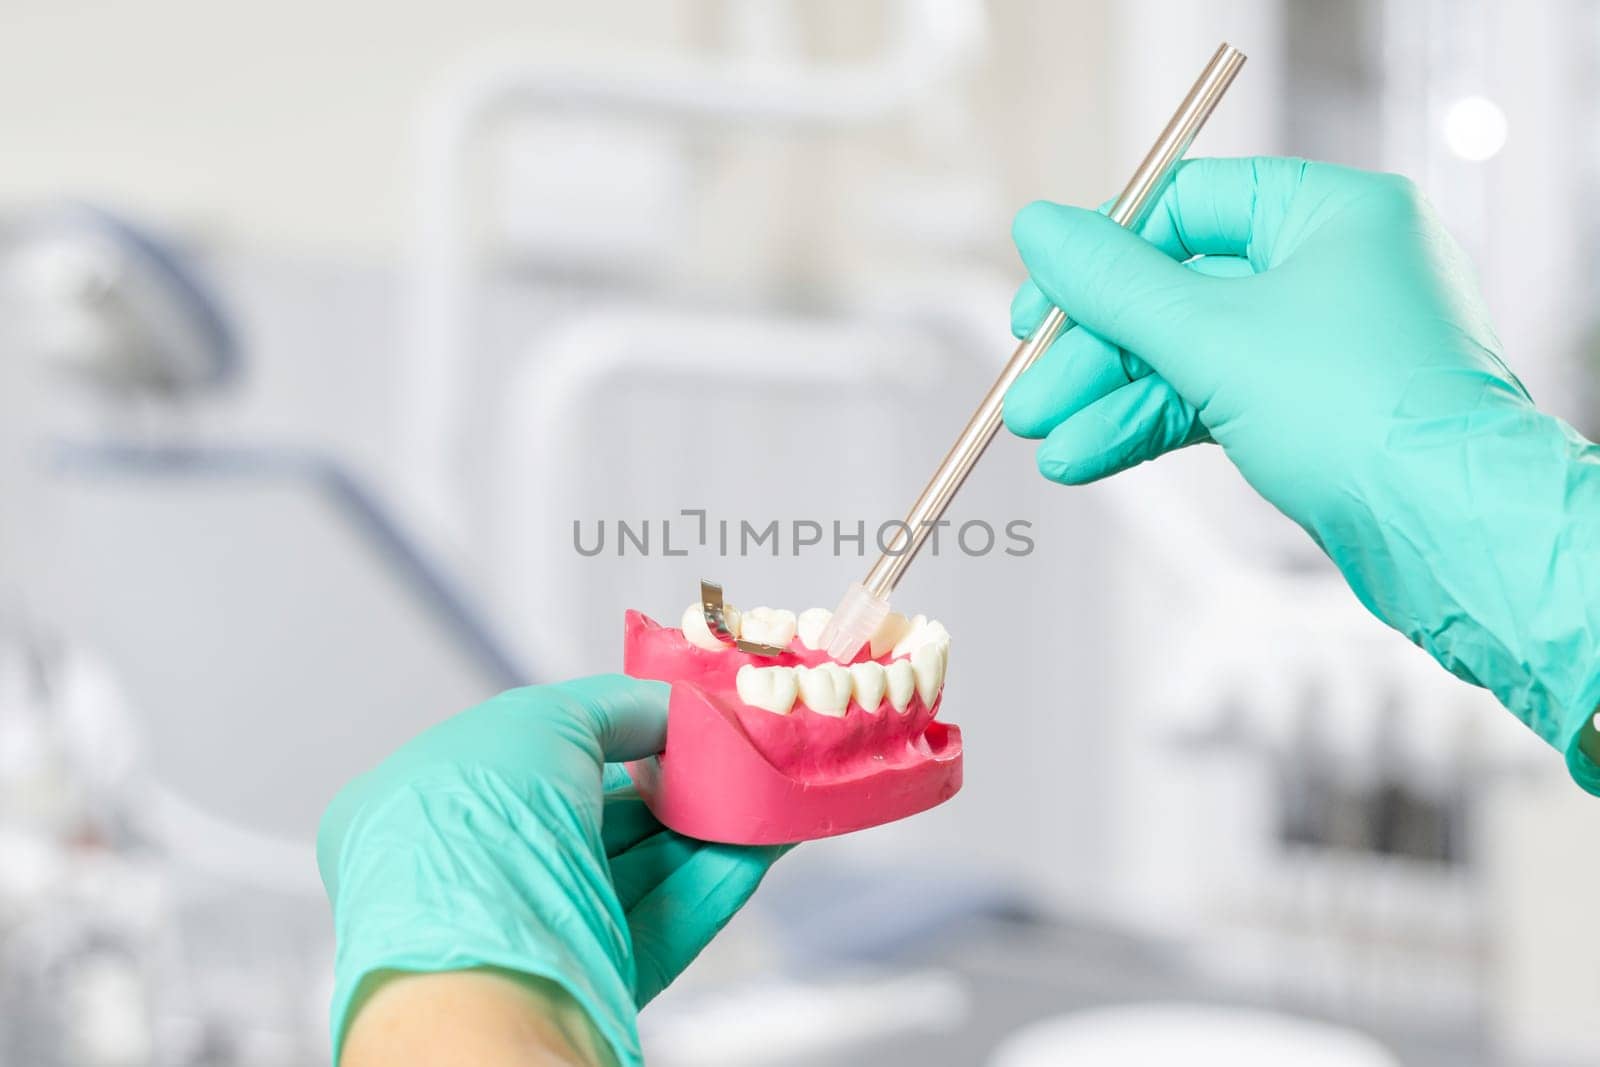 Dentist's hands in gloves with a saliva ejector and a human jaw layout. by mvg6894